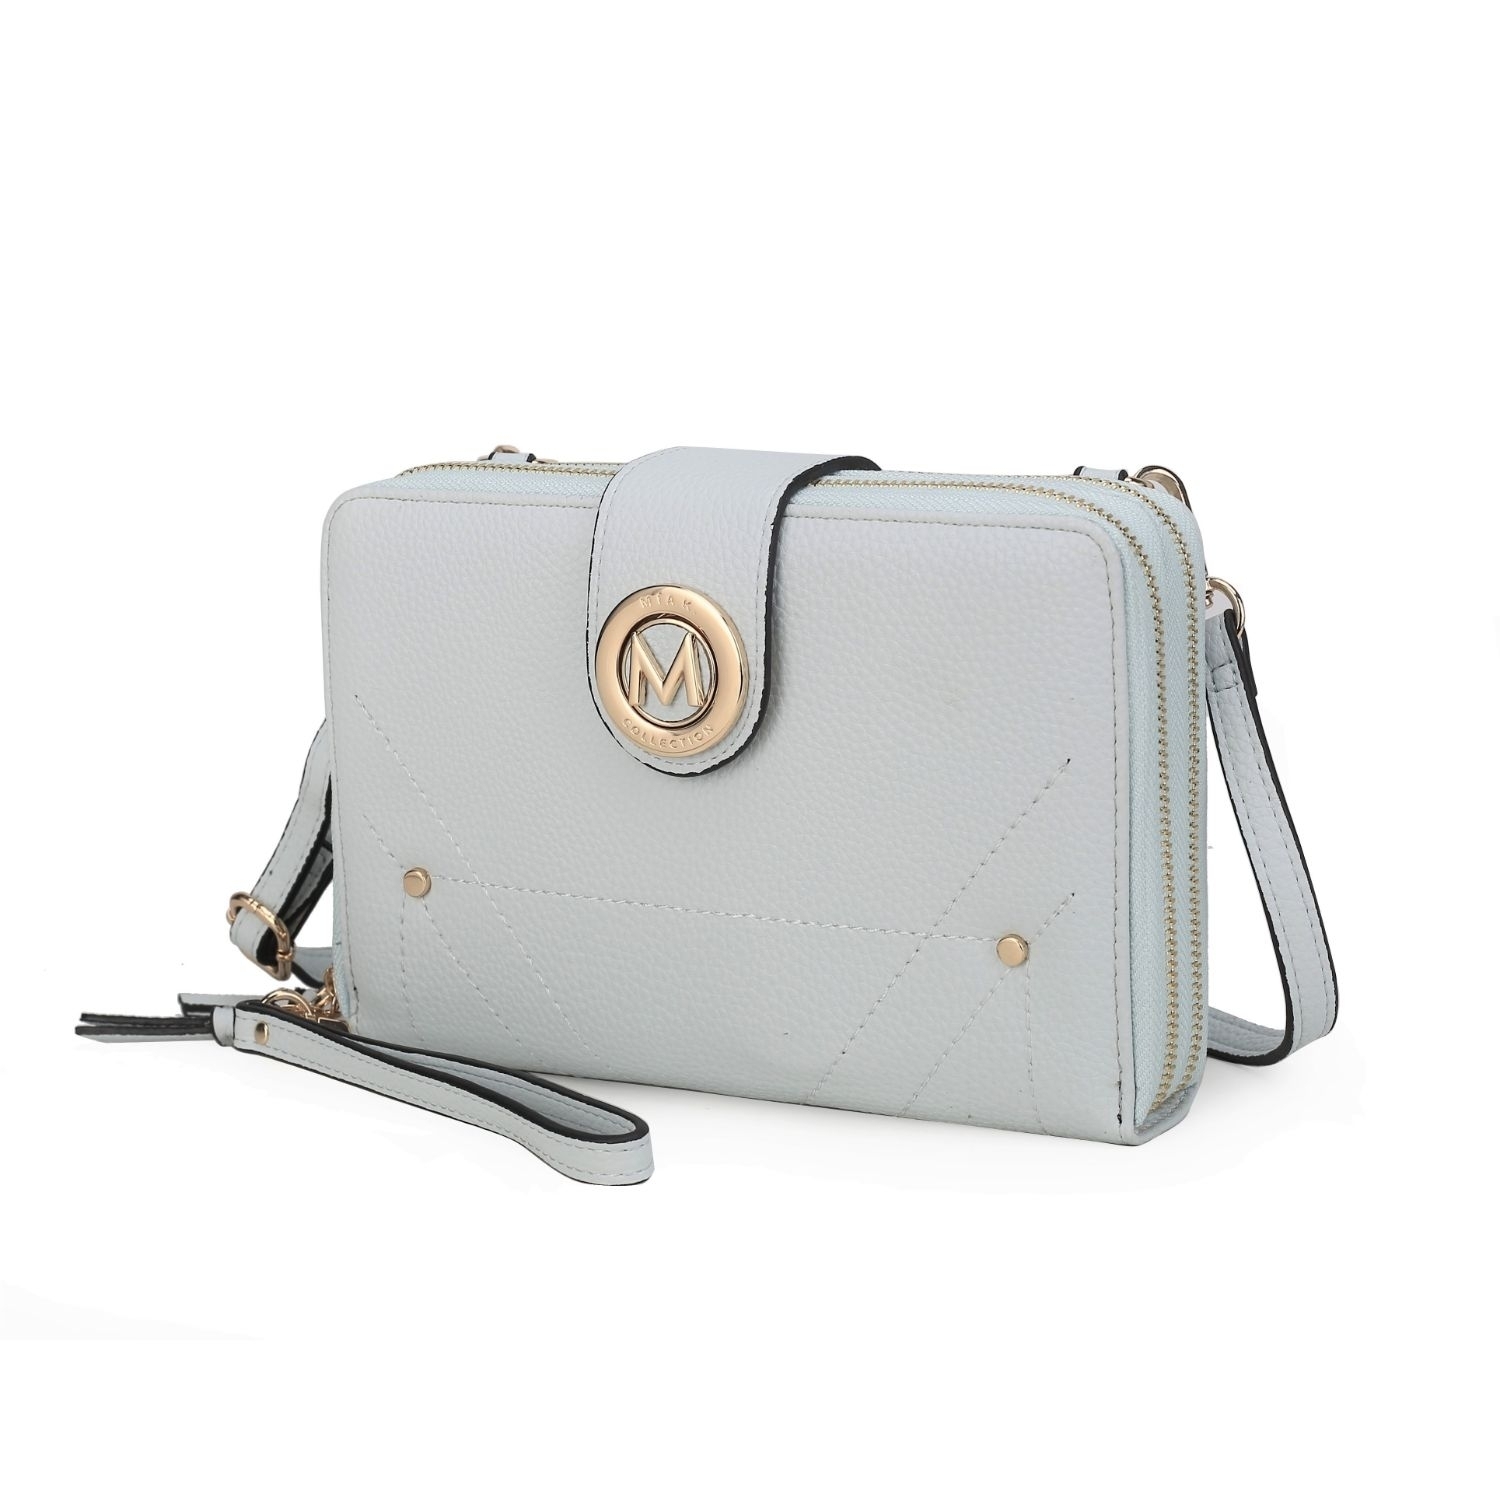 MKF Collection Sage Cell-phone - Wallet Crossbody Handbag With Optional Wristlet By Mia K - Navy